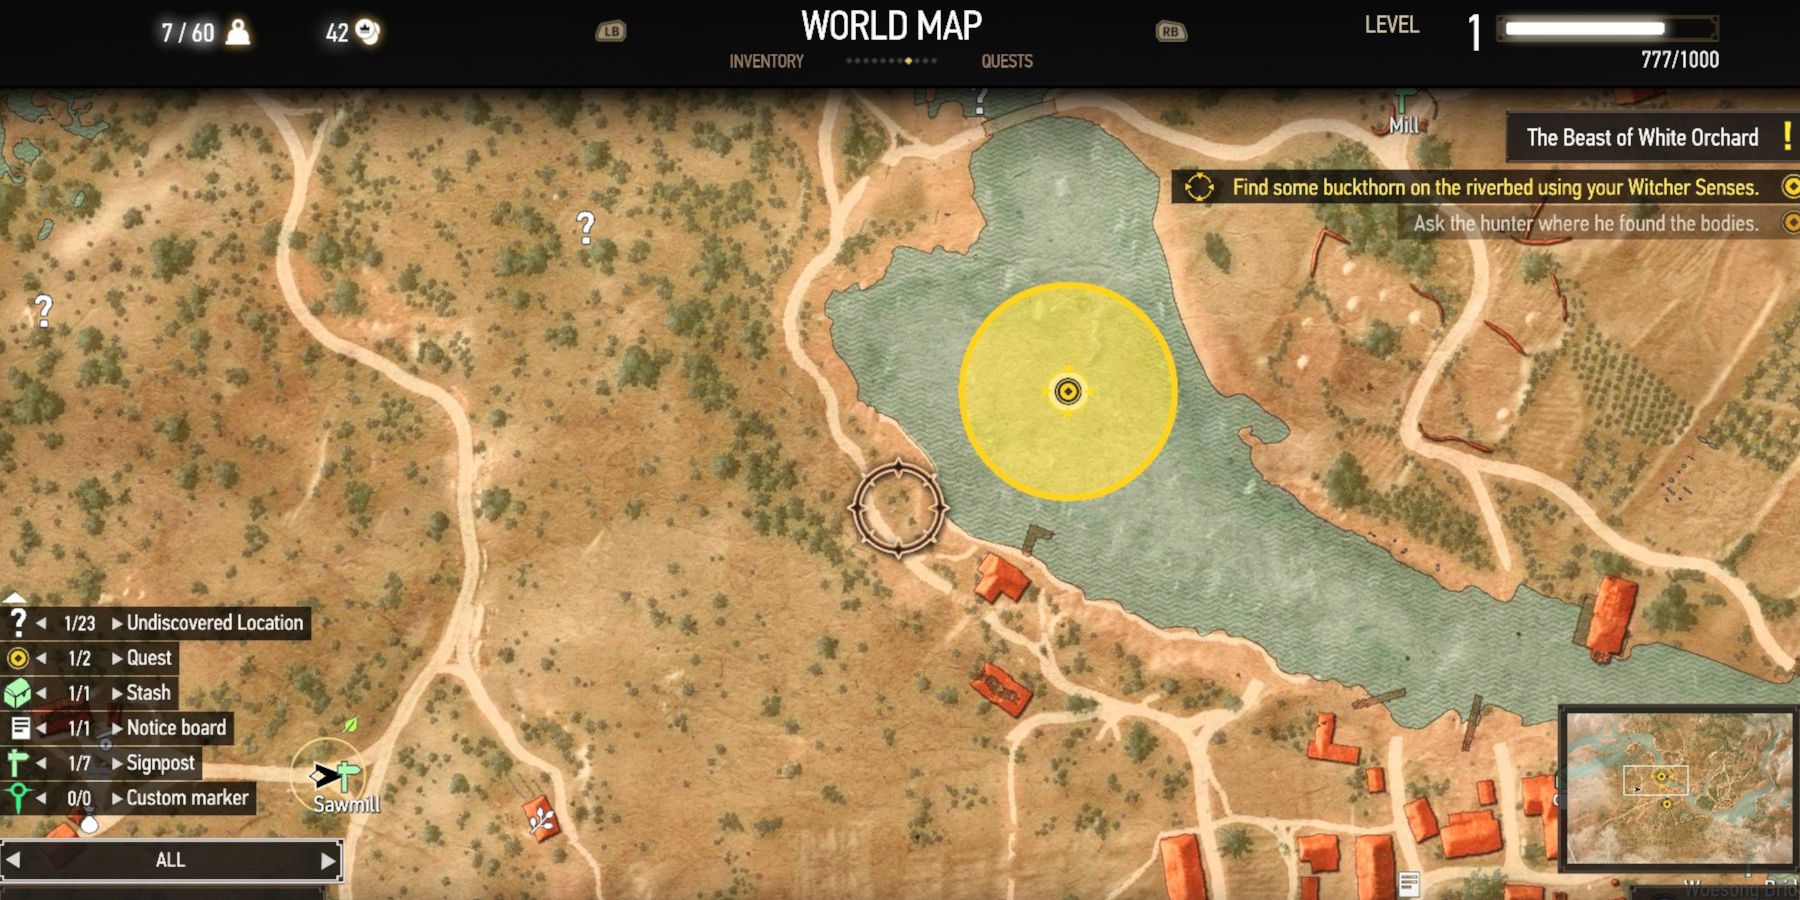 The Witcher 3 Buckthorn location on the map